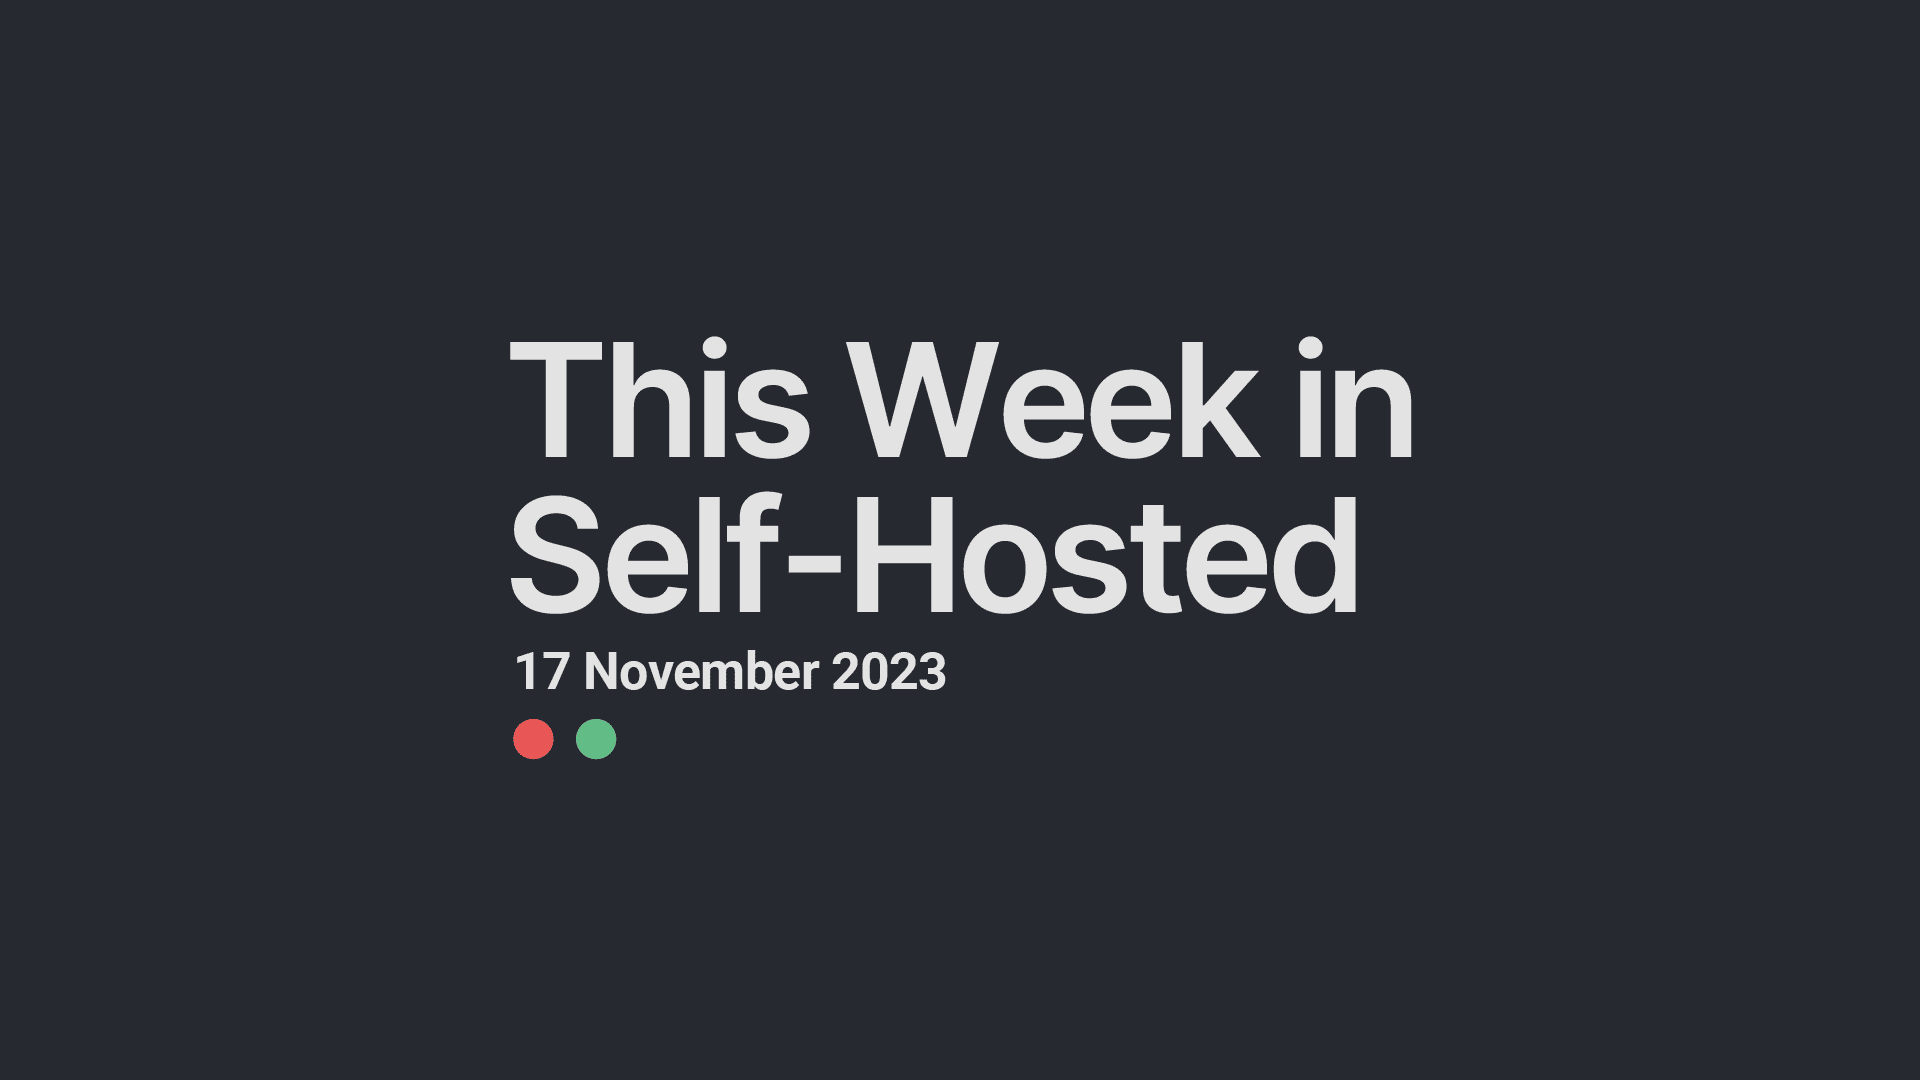 This Week in Self-Hosted (17 November 2023) Post image